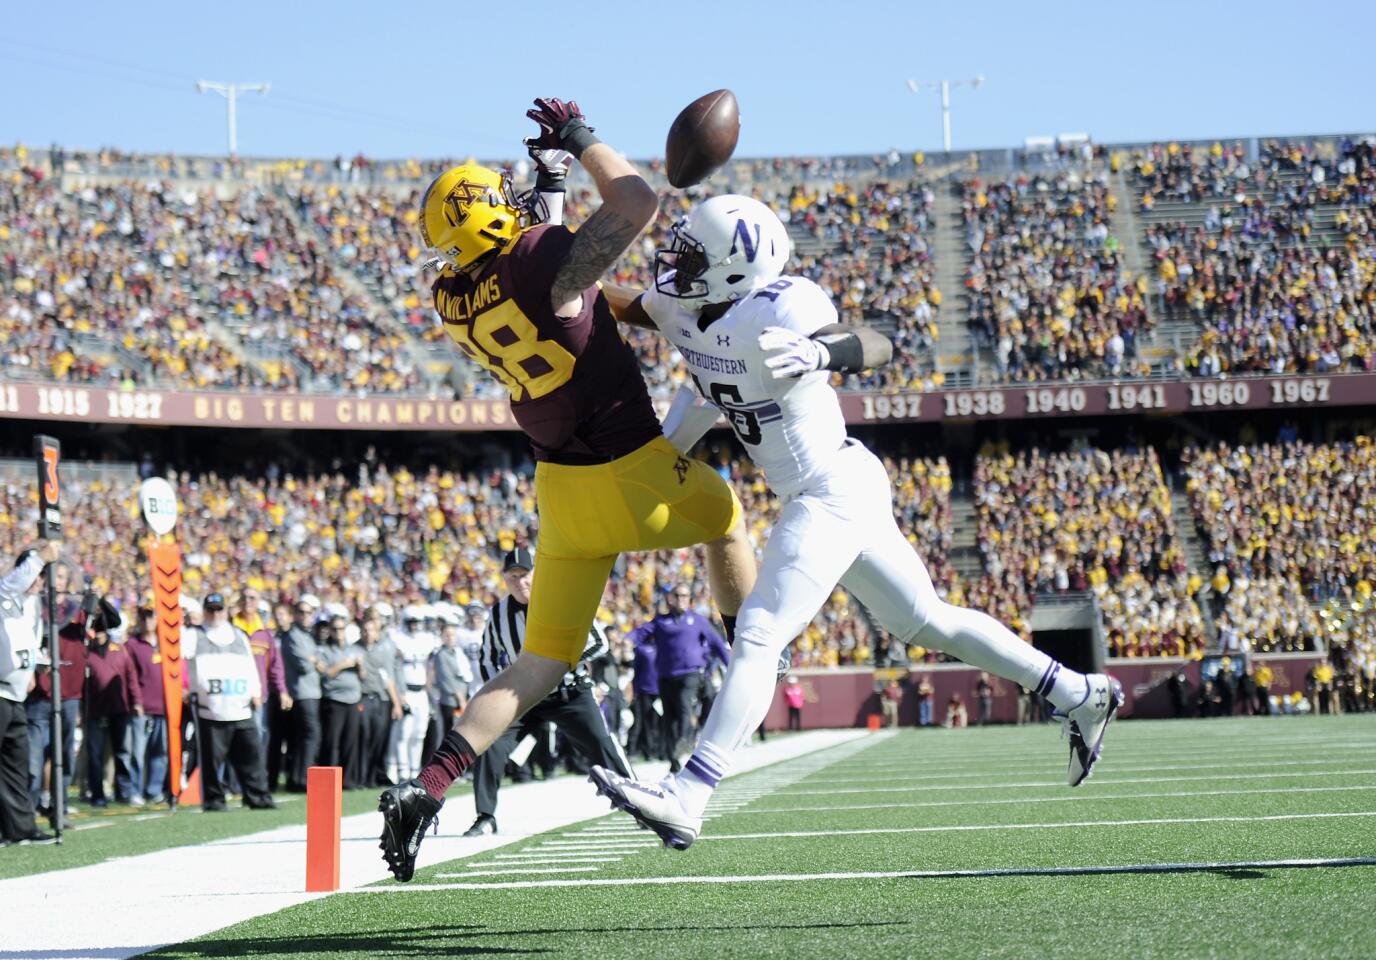 Northwestern's Godwin Igwebuike breaks up a touchdown pass intended for Minnesota's Maxx Williams during the second half.